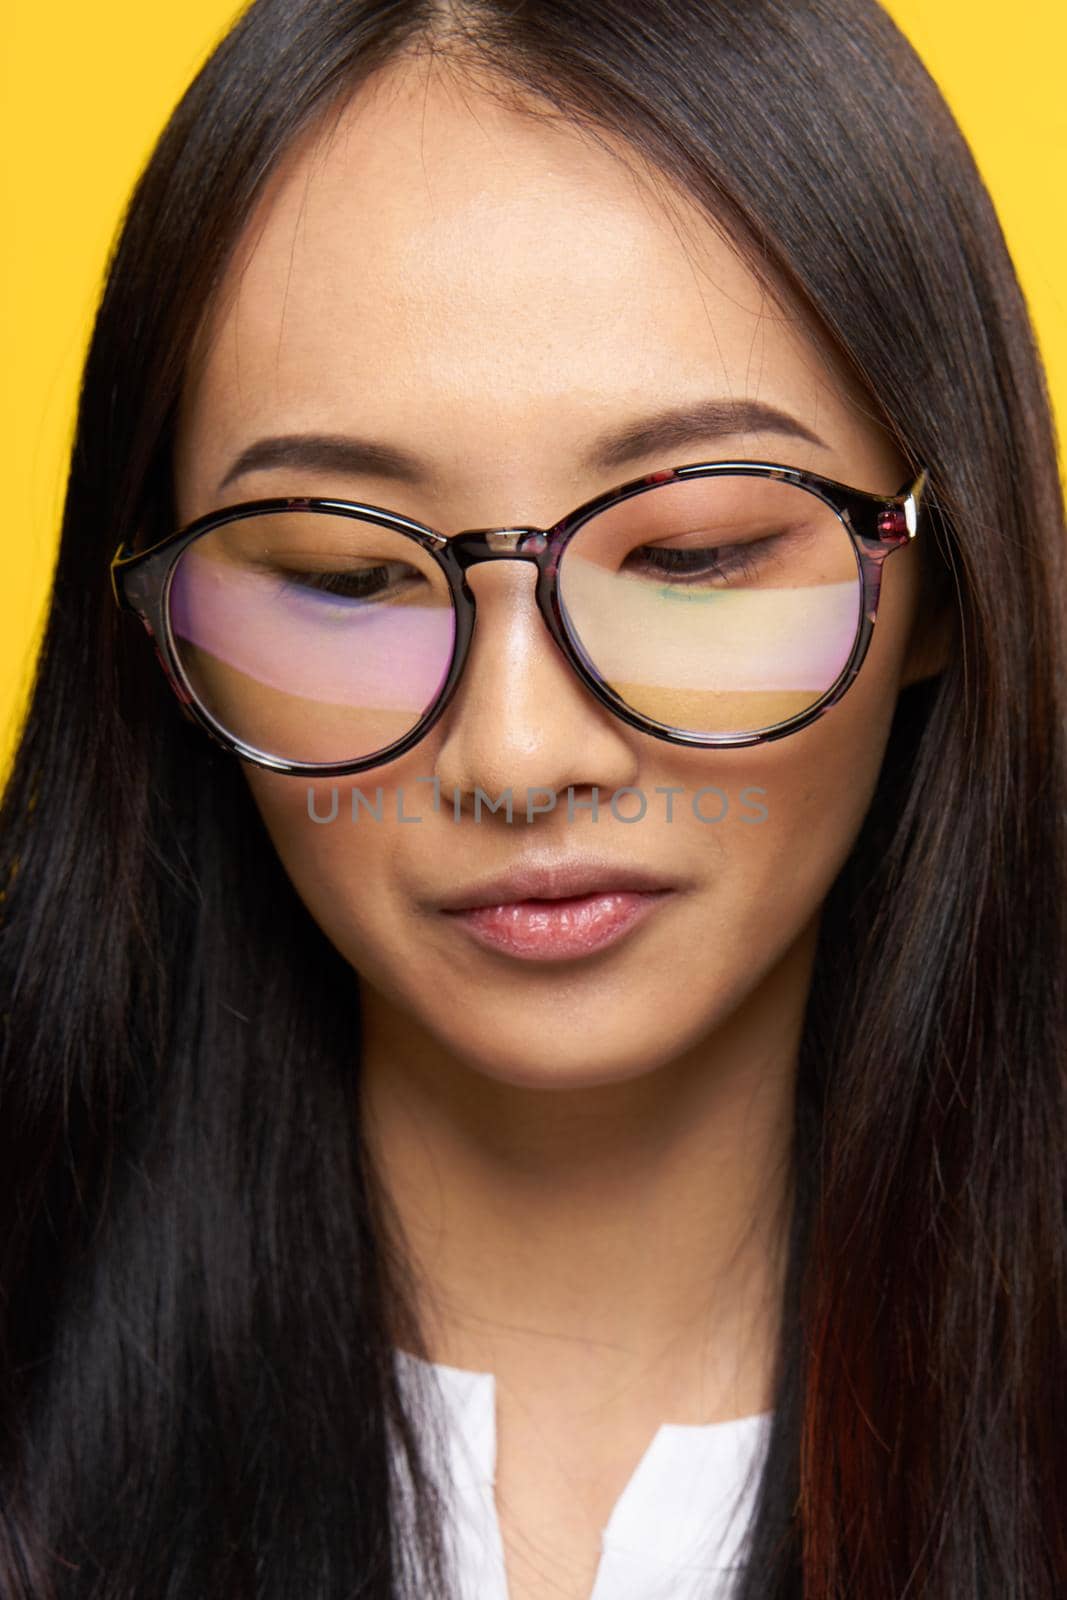 asian woman with glasses student close-up yellow background. High quality photo